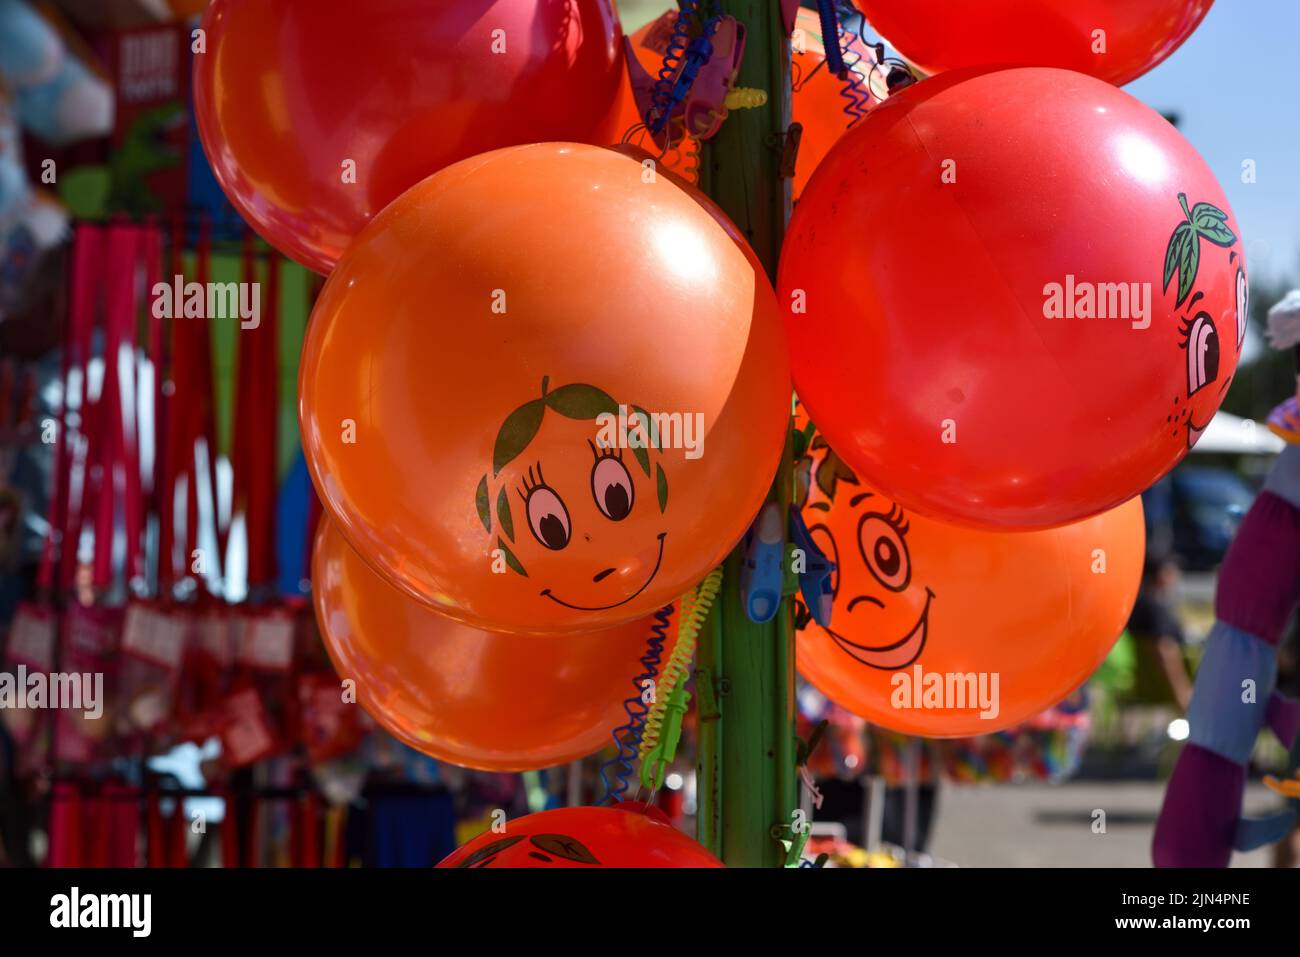 Bright red and orange balloons with smiling faces hanging up for sale at the seaside. Stock Photo